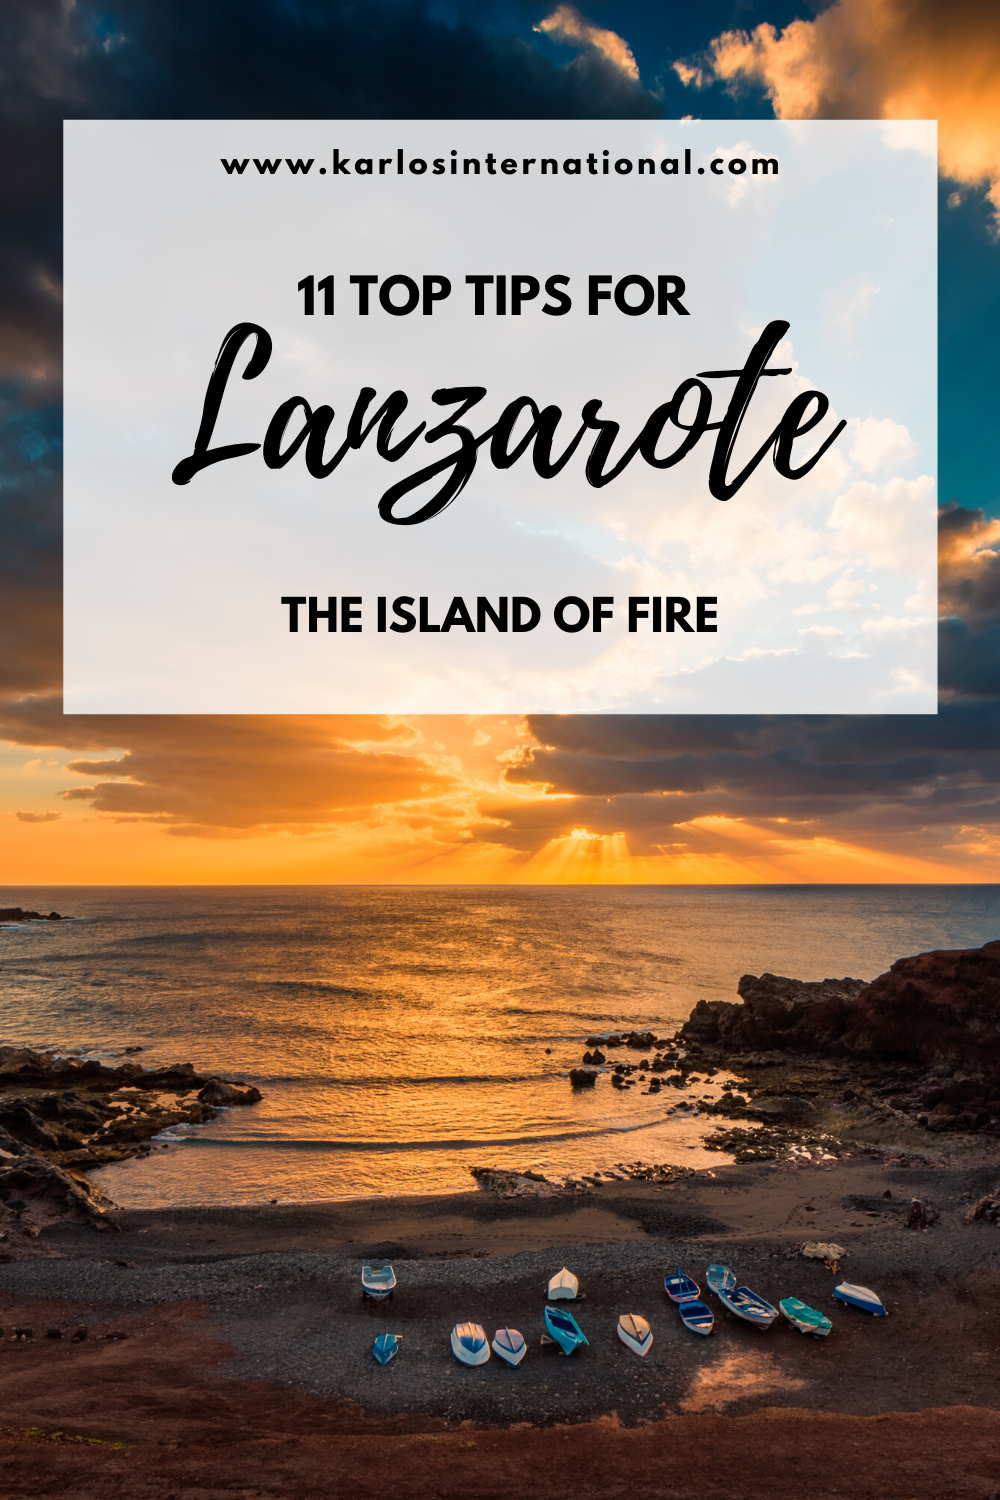 11 Top Tips when travelling to Lanzarote, the Canary Islands.  #Lanzarote #Travel #Travelblogger #CanaryIslands #SPAIN